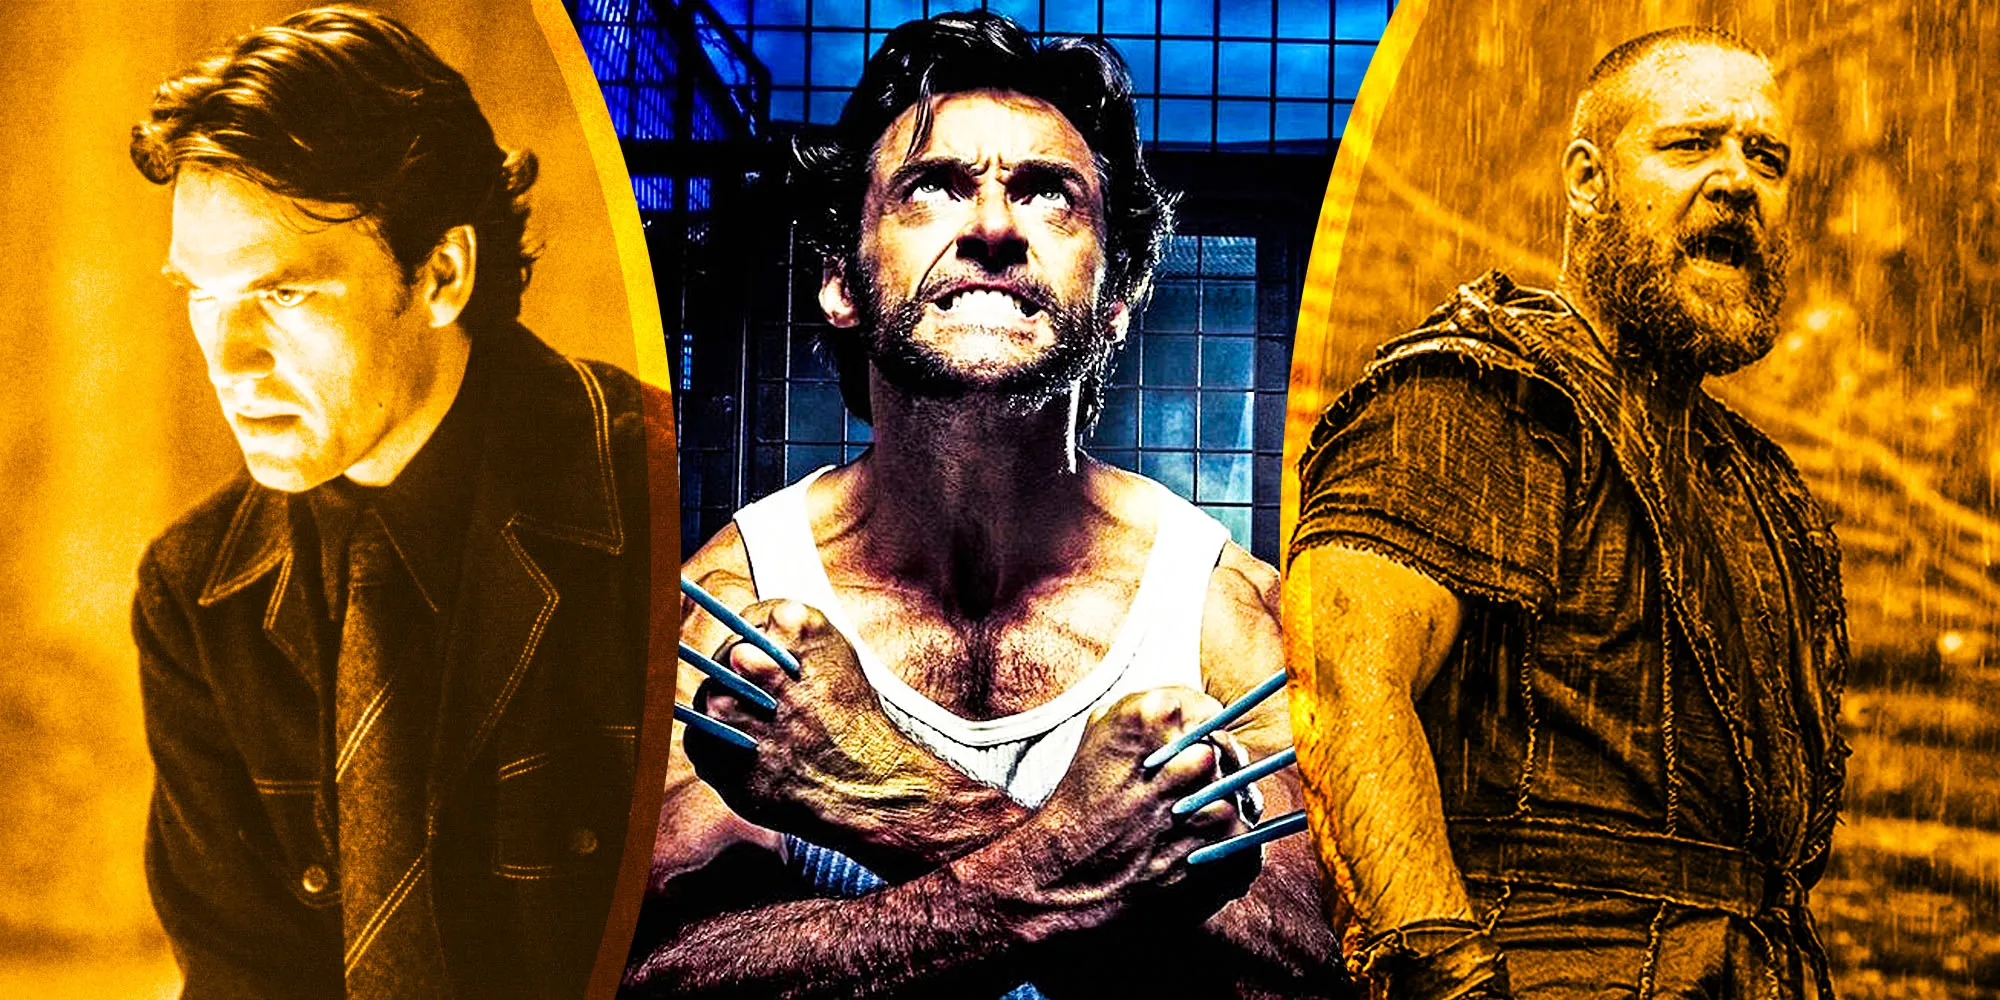 Which film marked Hugh Jackman's final appearance as Wolverine before the character was integrated into the Marvel Cinematic Universe?